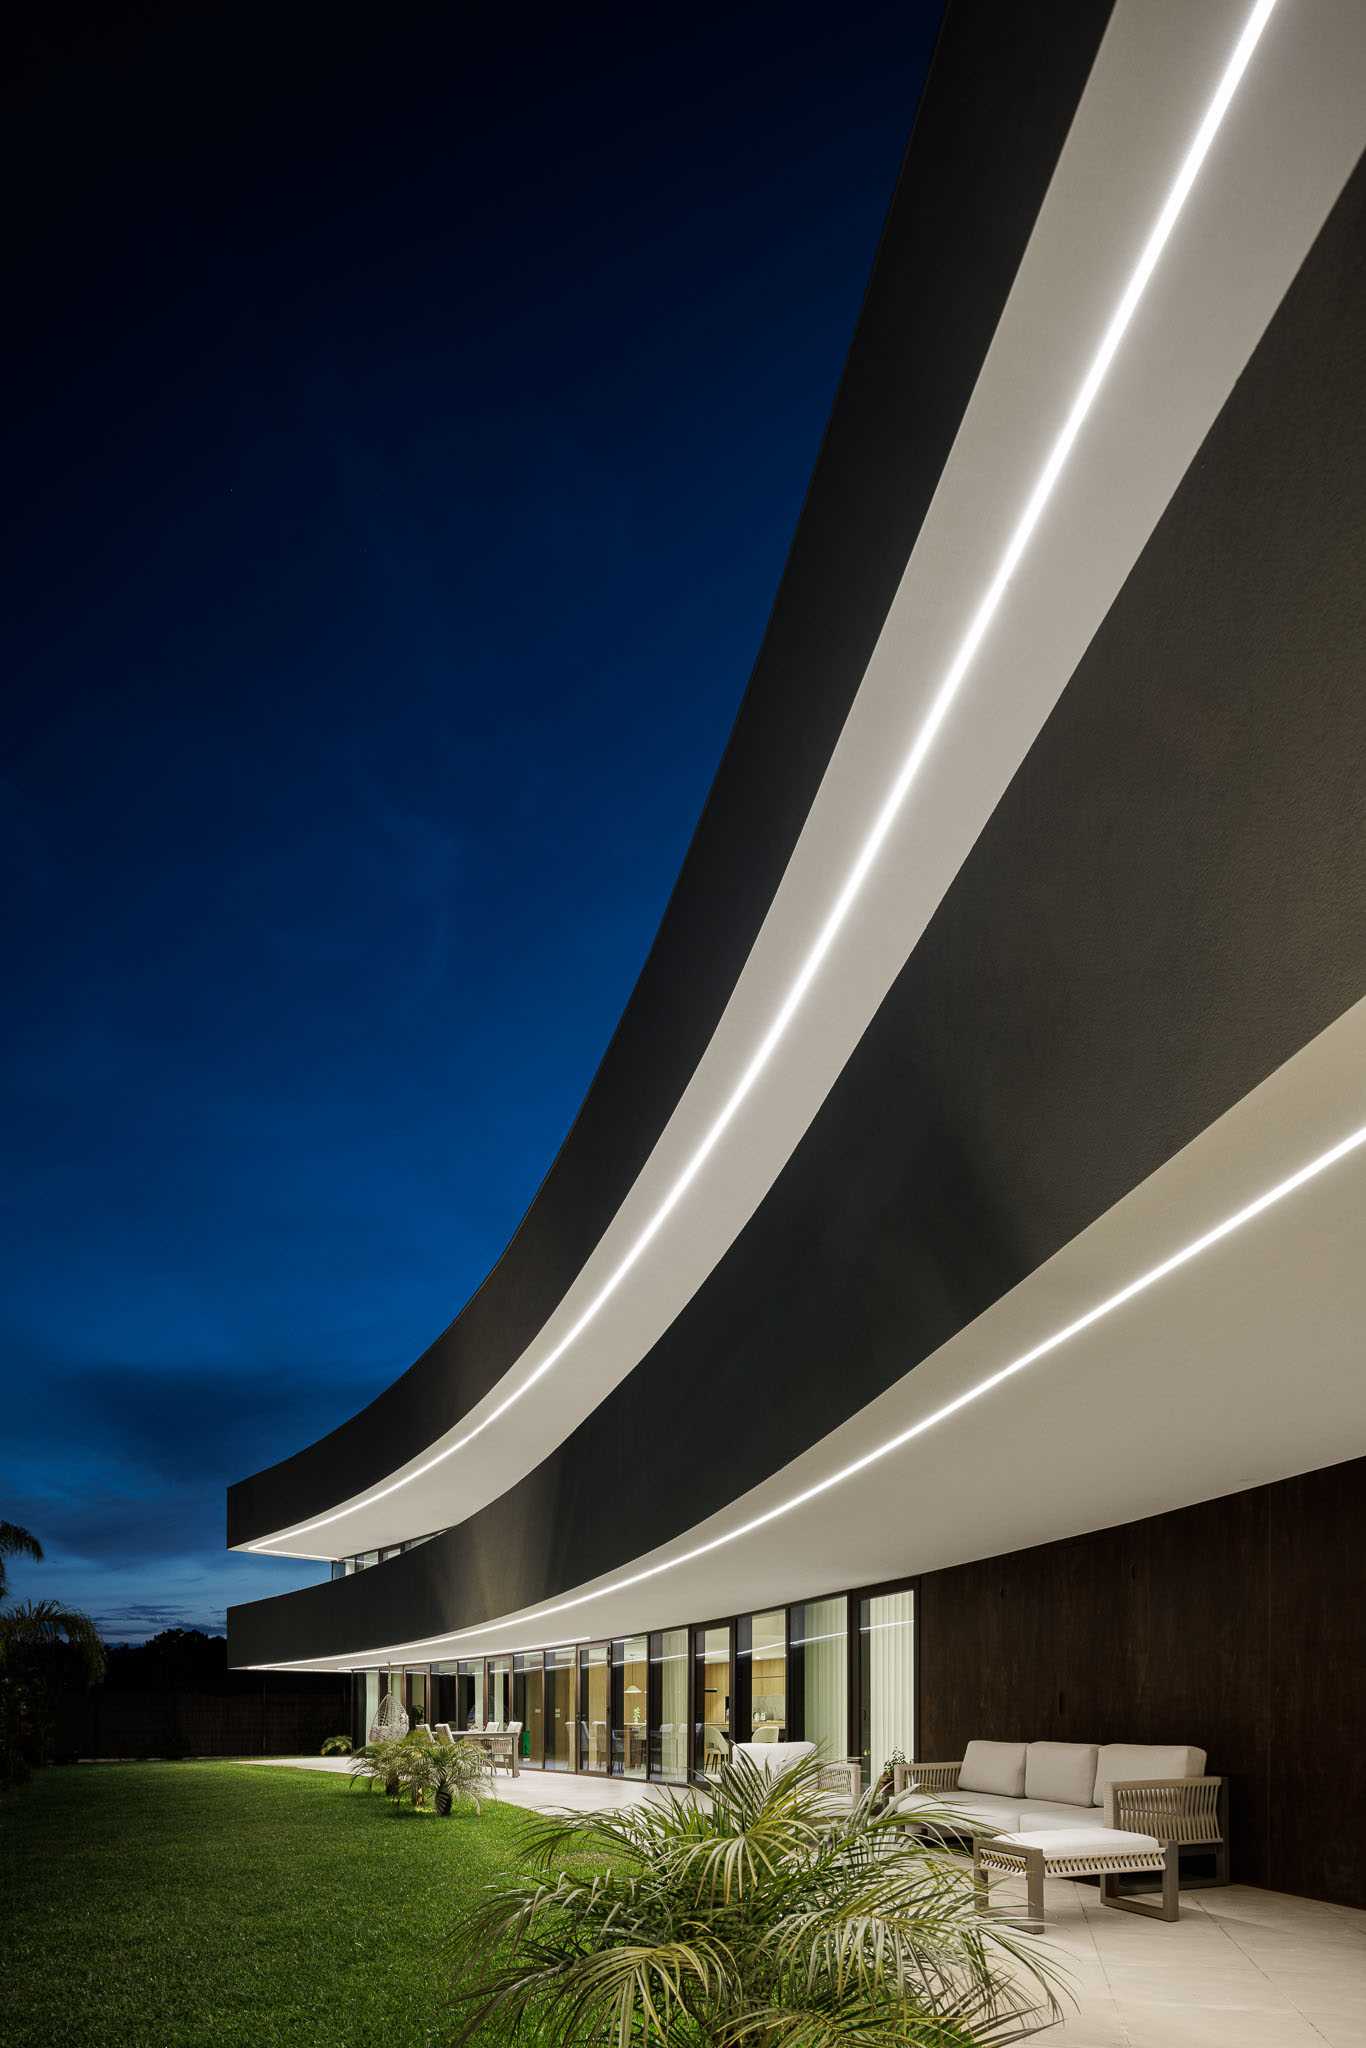 The curved design of this modern home is accentuated by exterior lighting that seamlessly integrates into the architecture.